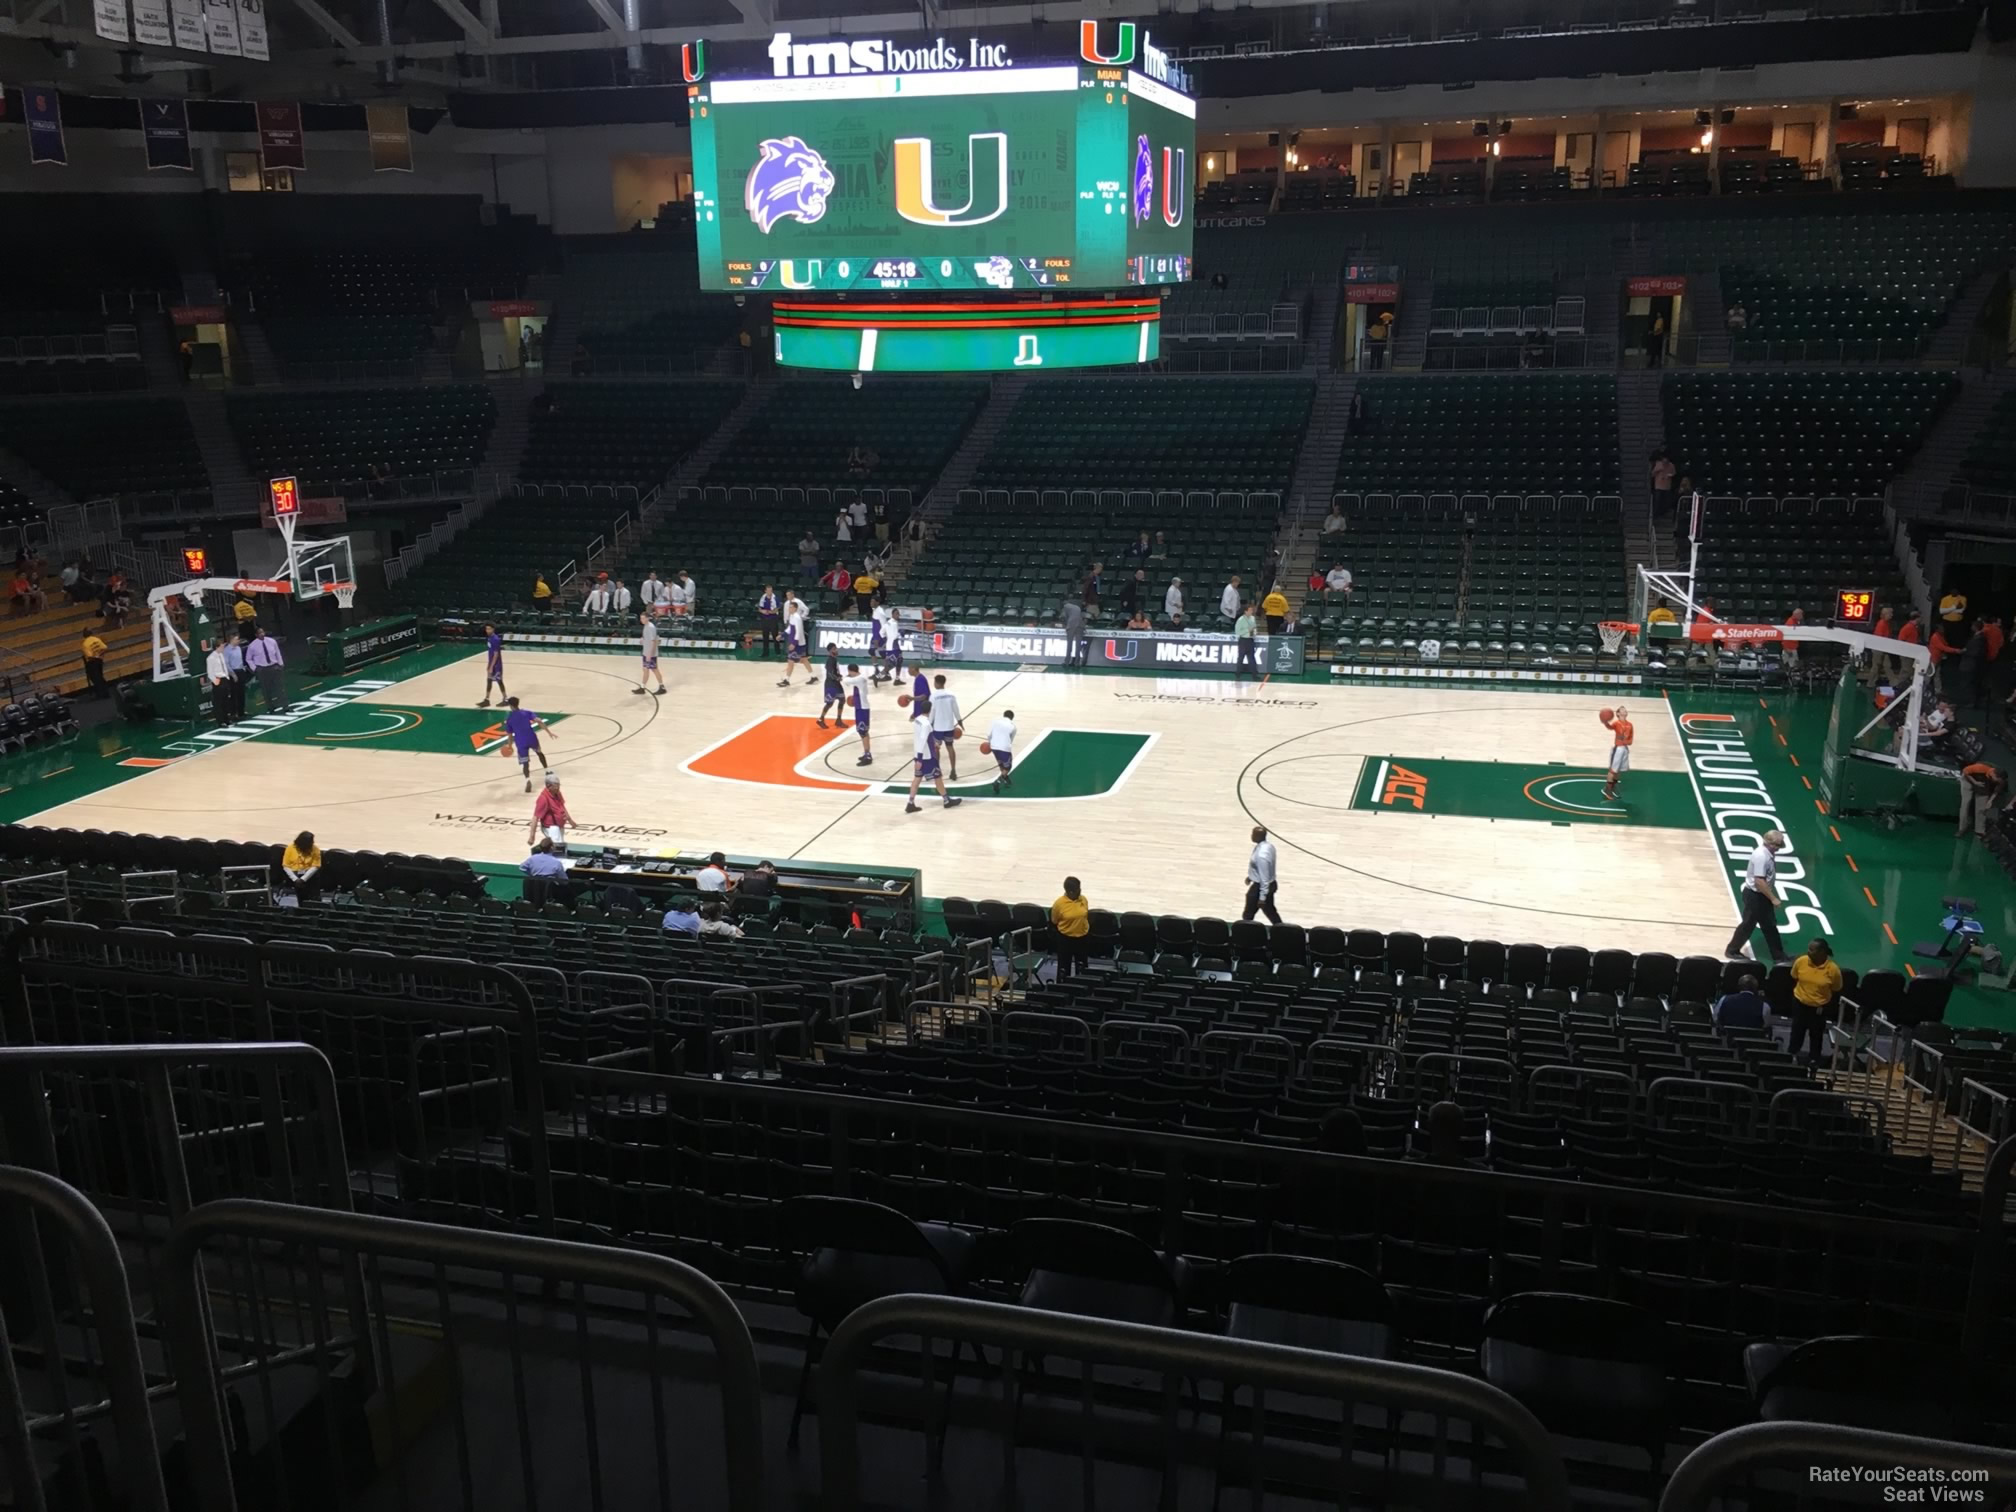 Watsco Center Seating Chart With Rows